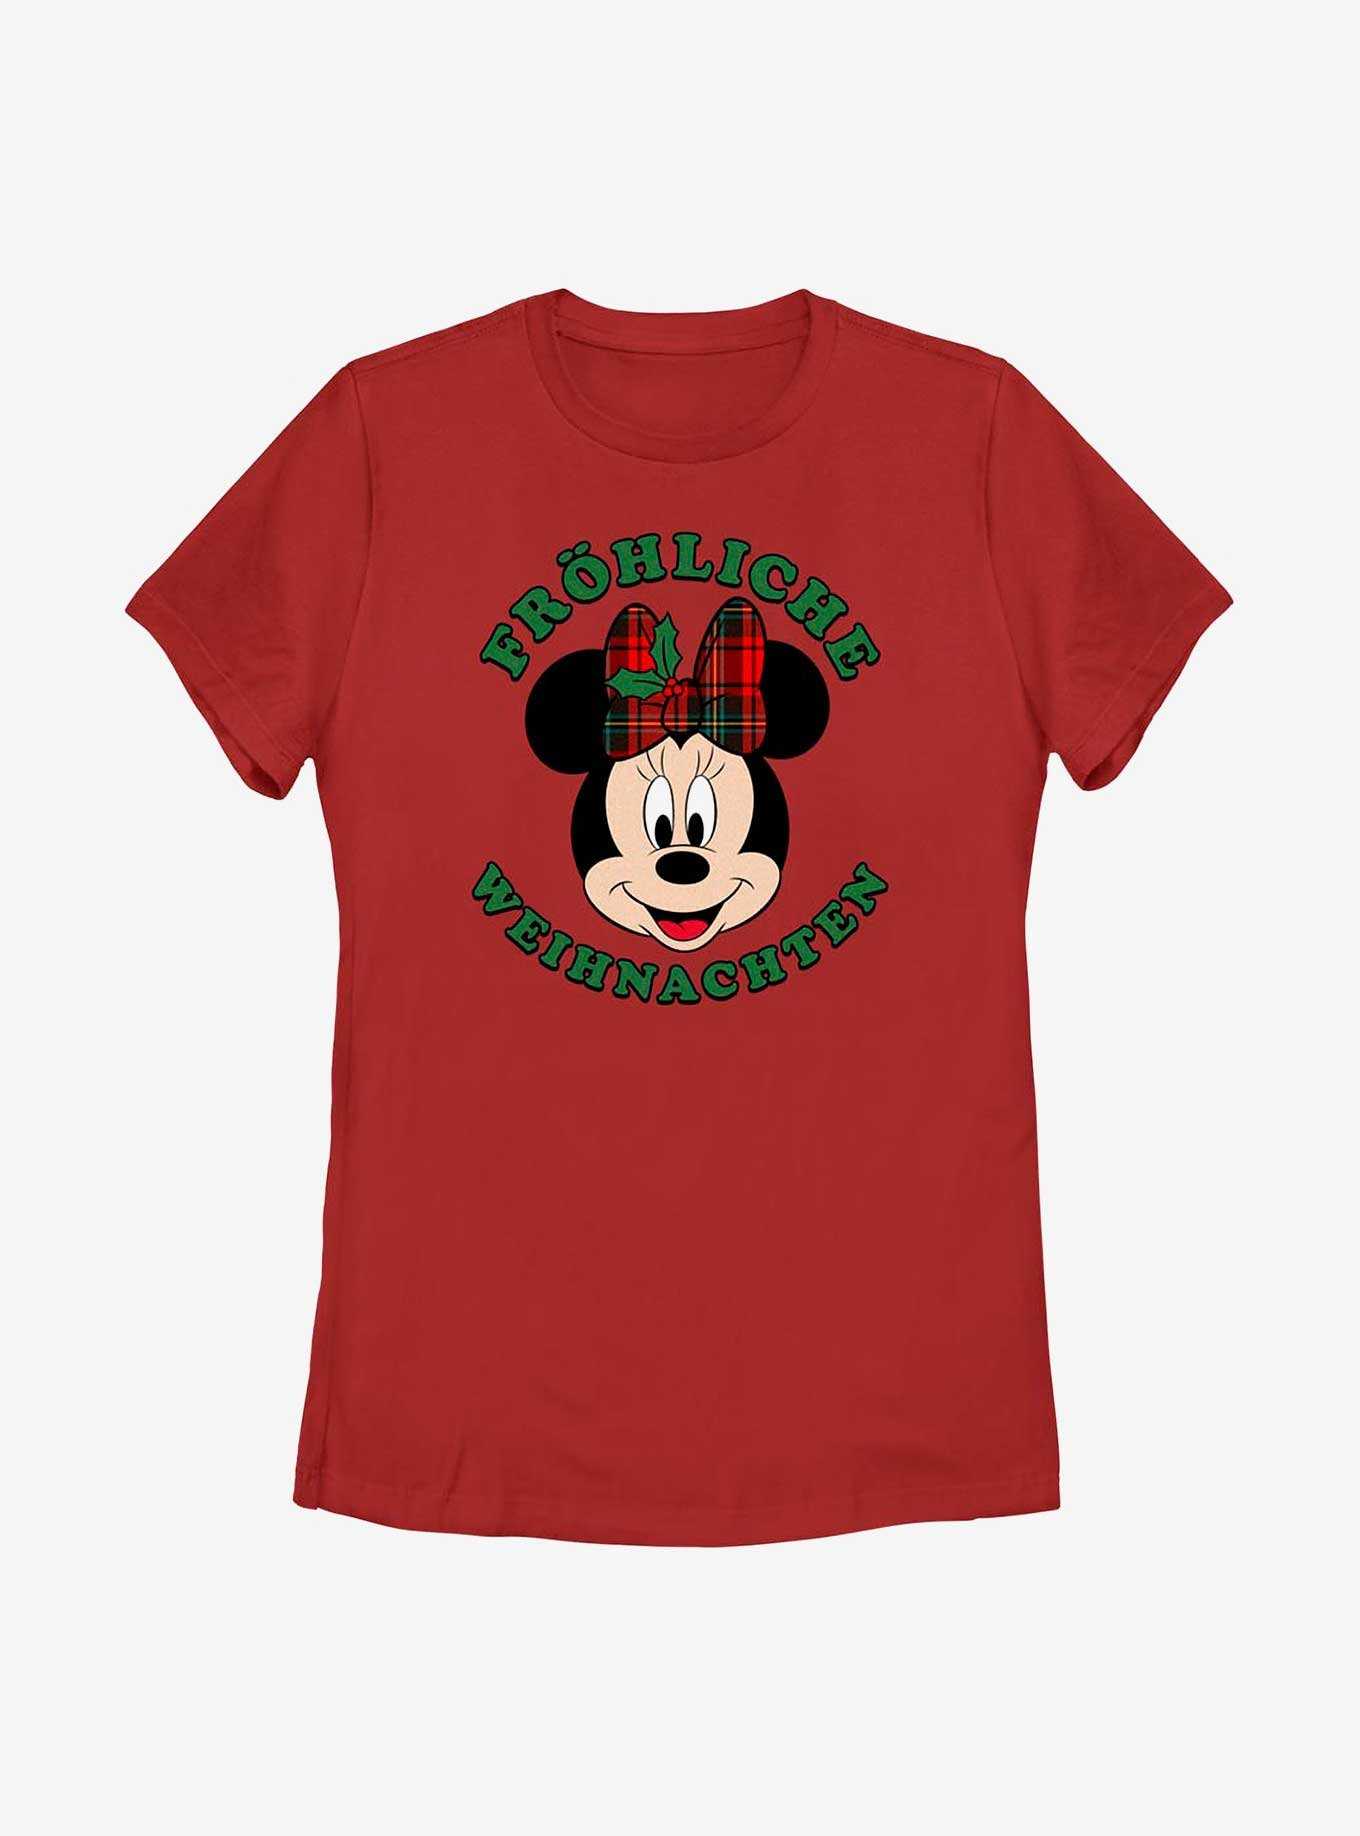 Disney Minnie Mouse Frohliche Weihnachten Merry Christmas in German Womens T-Shirt, , hi-res